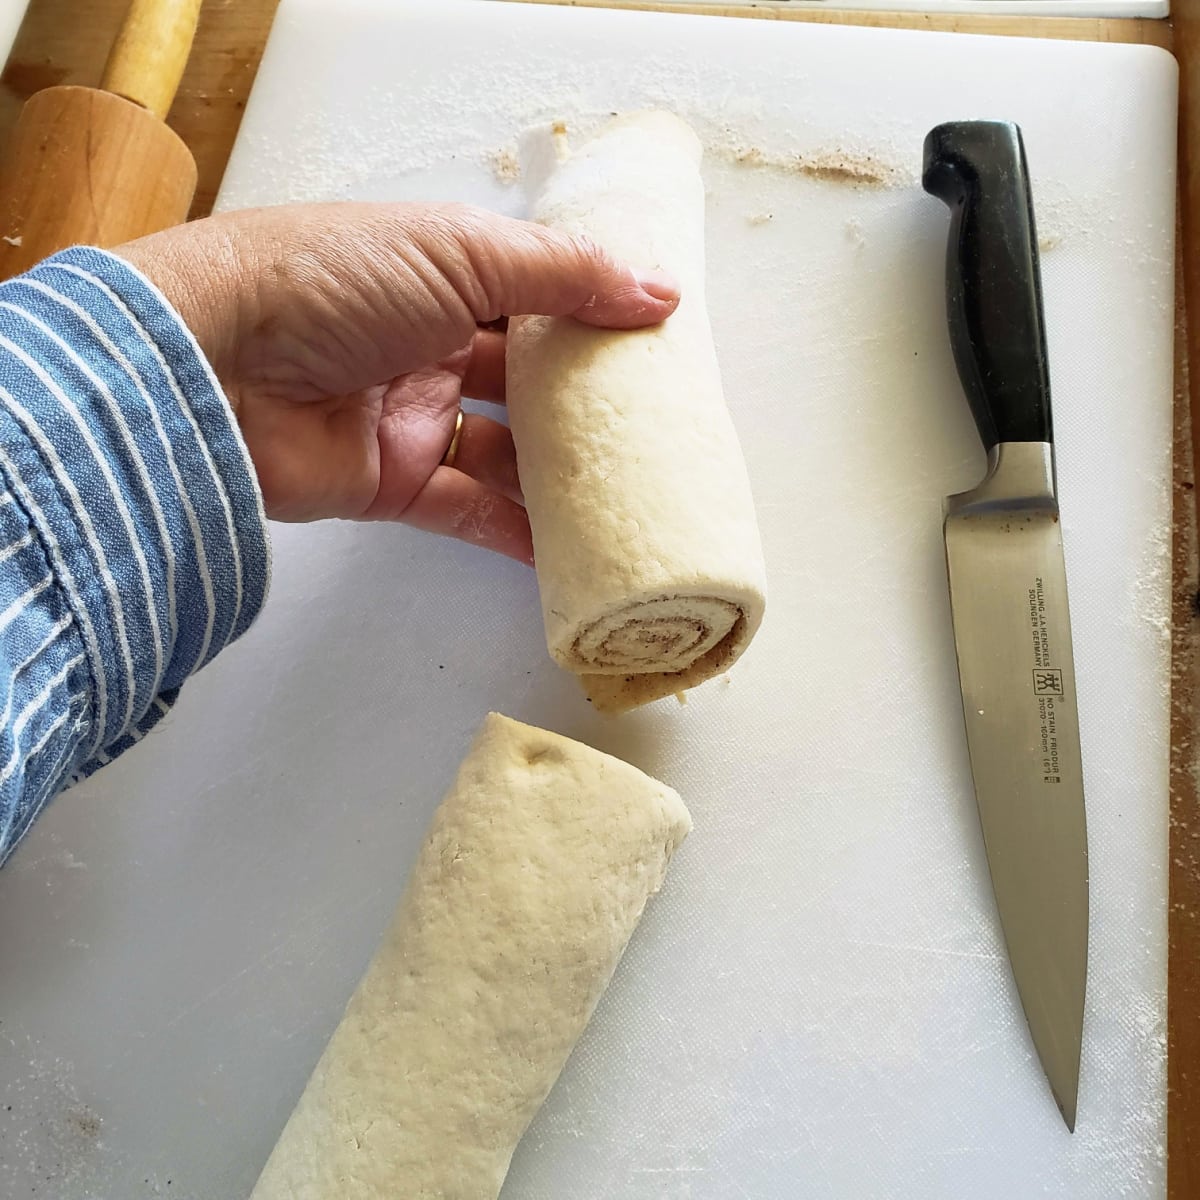 A hand holds half the dough log with a knife alongside on a white cutting board